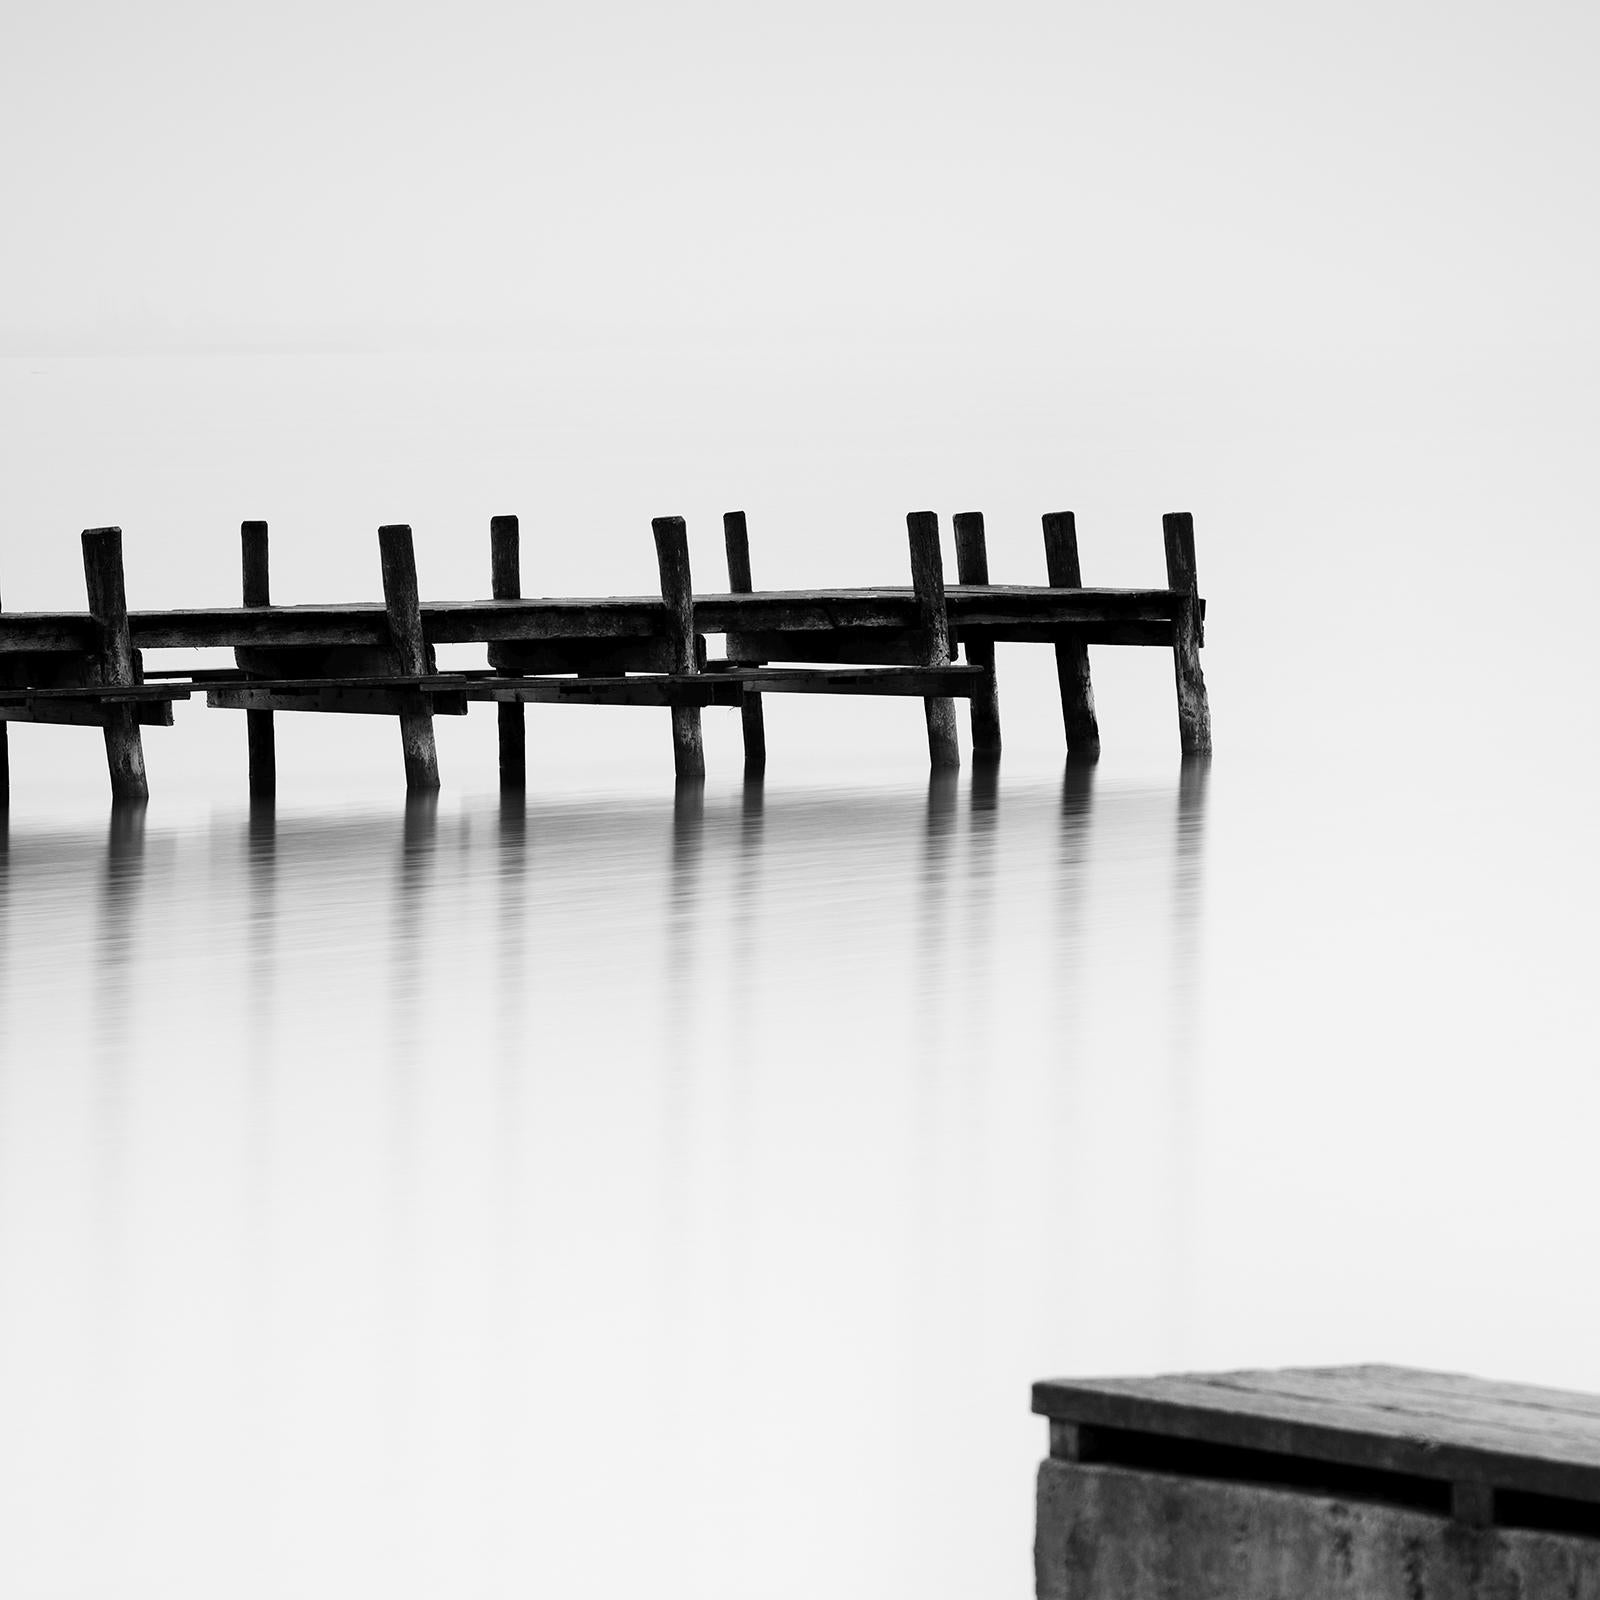 Misty morning on the Lake, Jetty, Pier, black and white photography, landscape For Sale 4